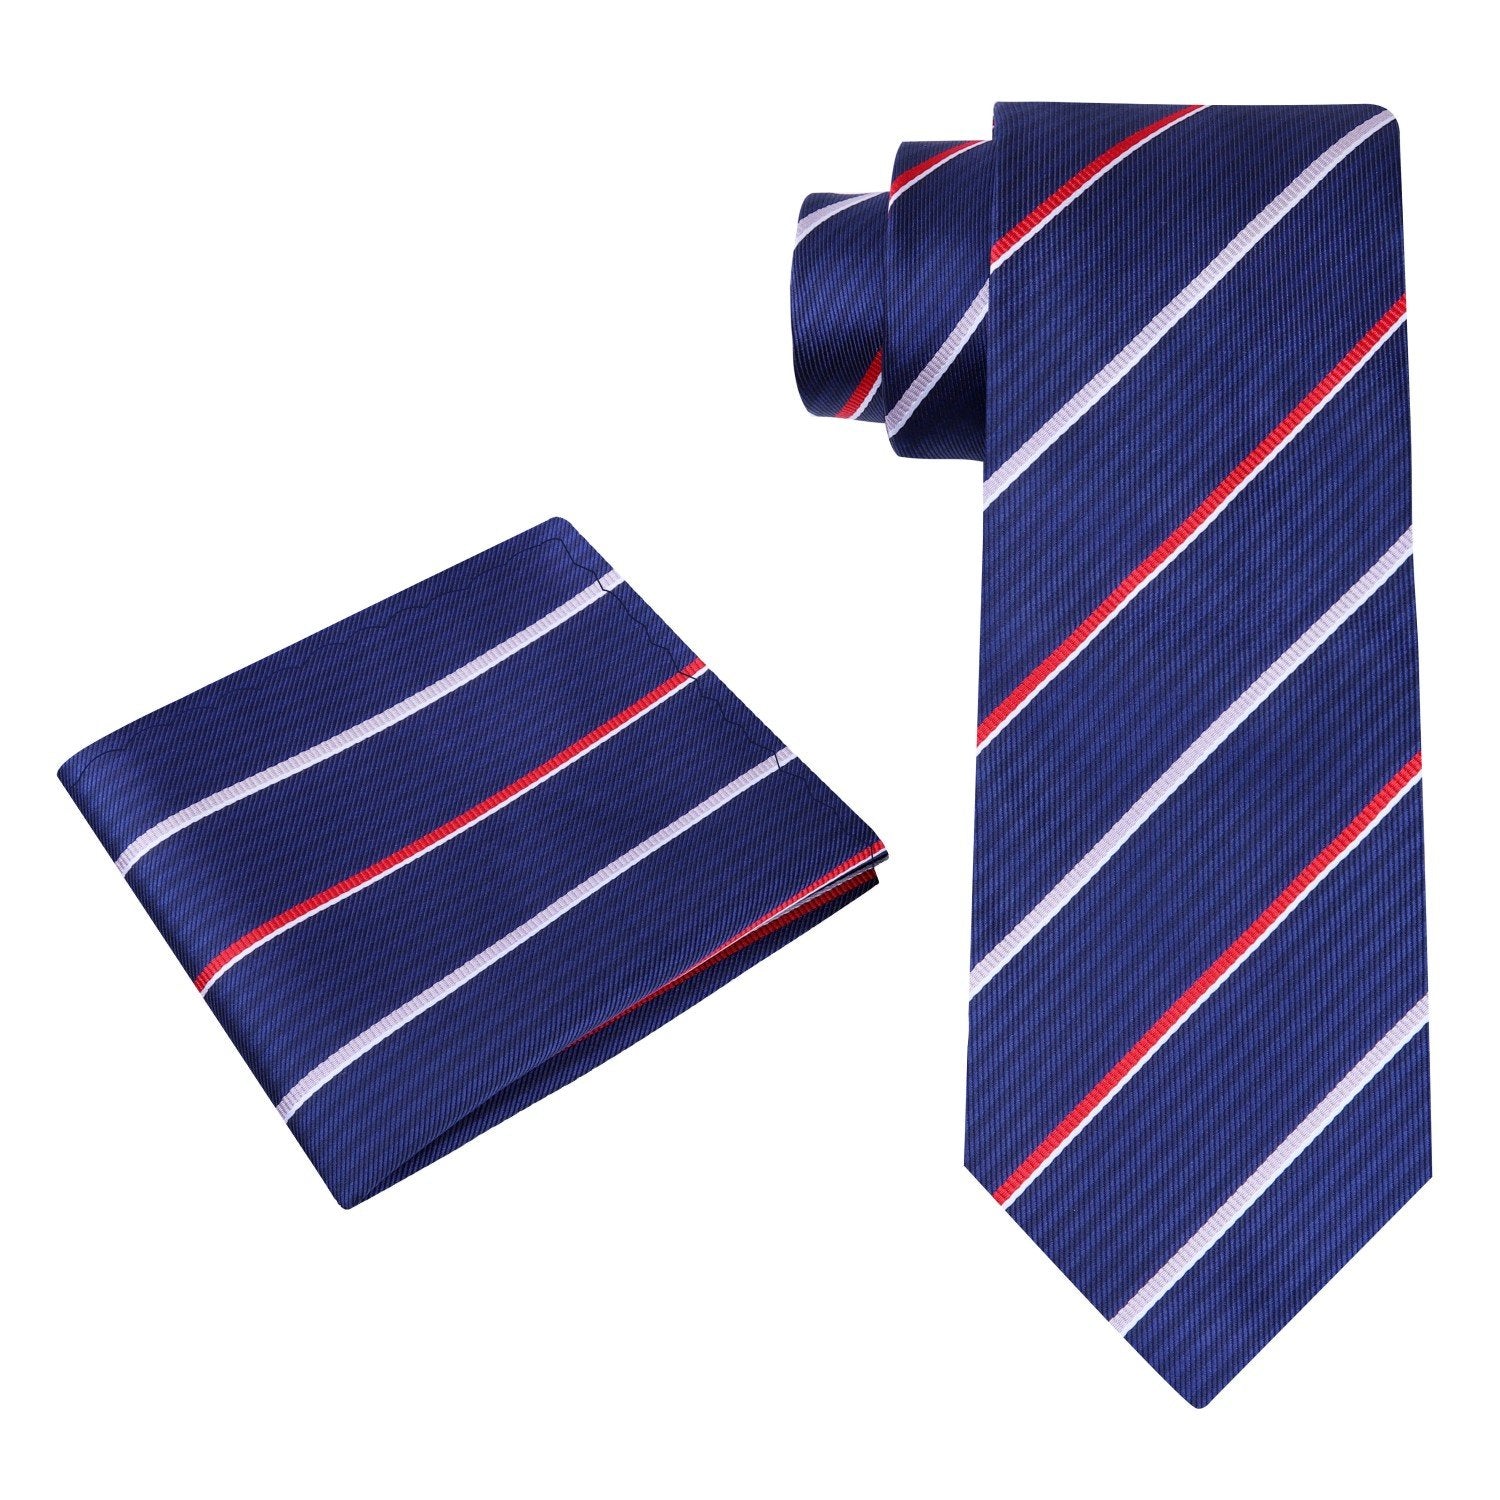 Alt View: Blue, Red Stripe Tie and Square